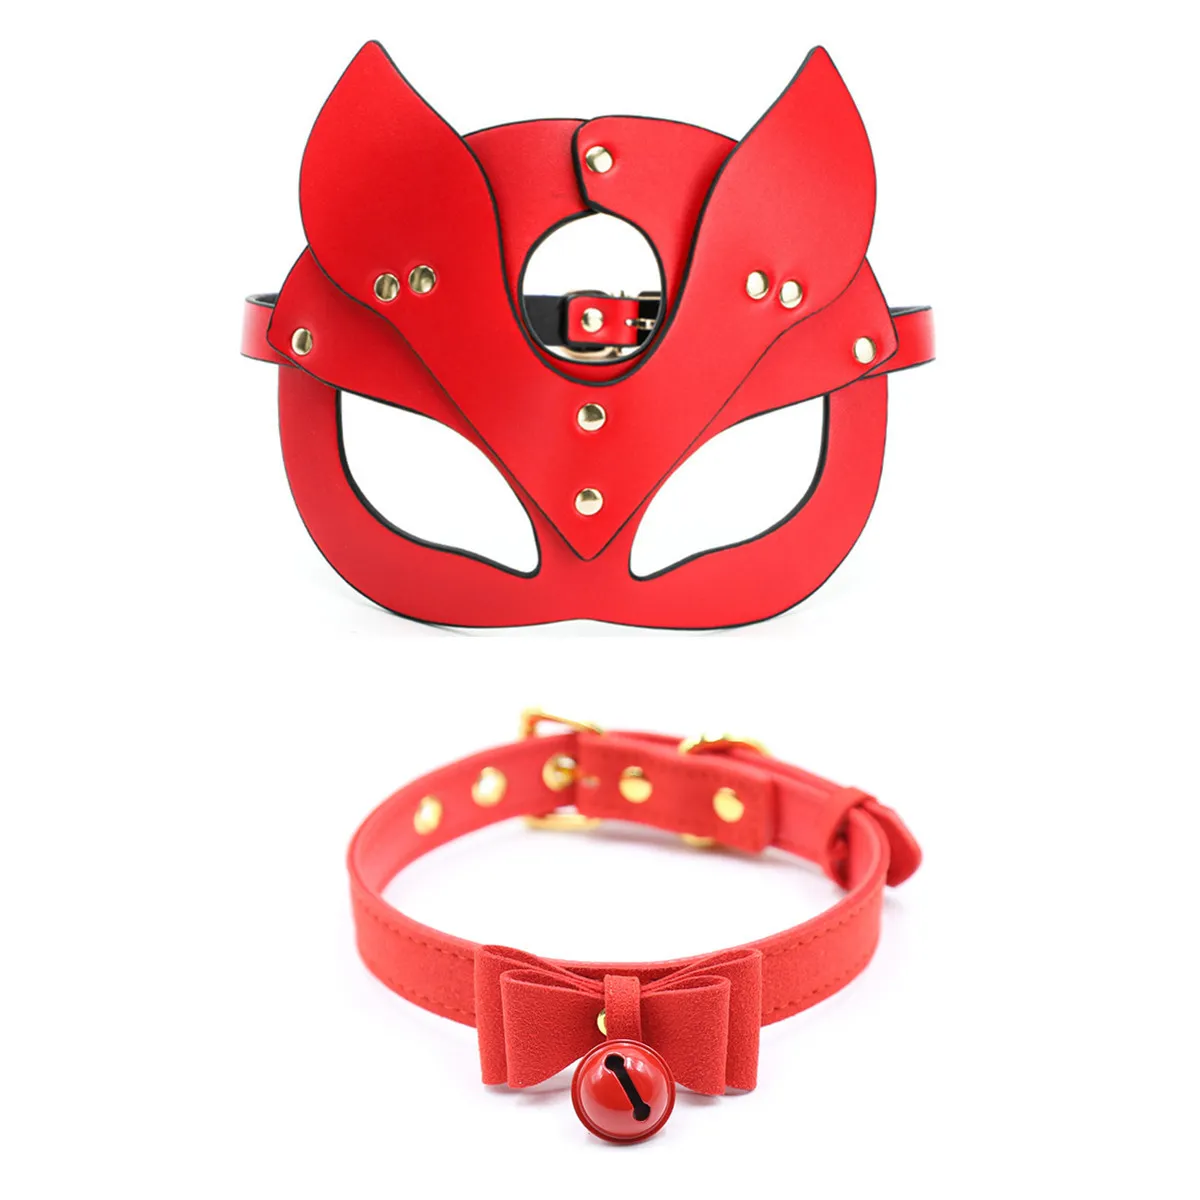 Leather Women Bdsm whip Collar Fetish Erotic Masquerade Halloween Carnival Cosplay Party Mask